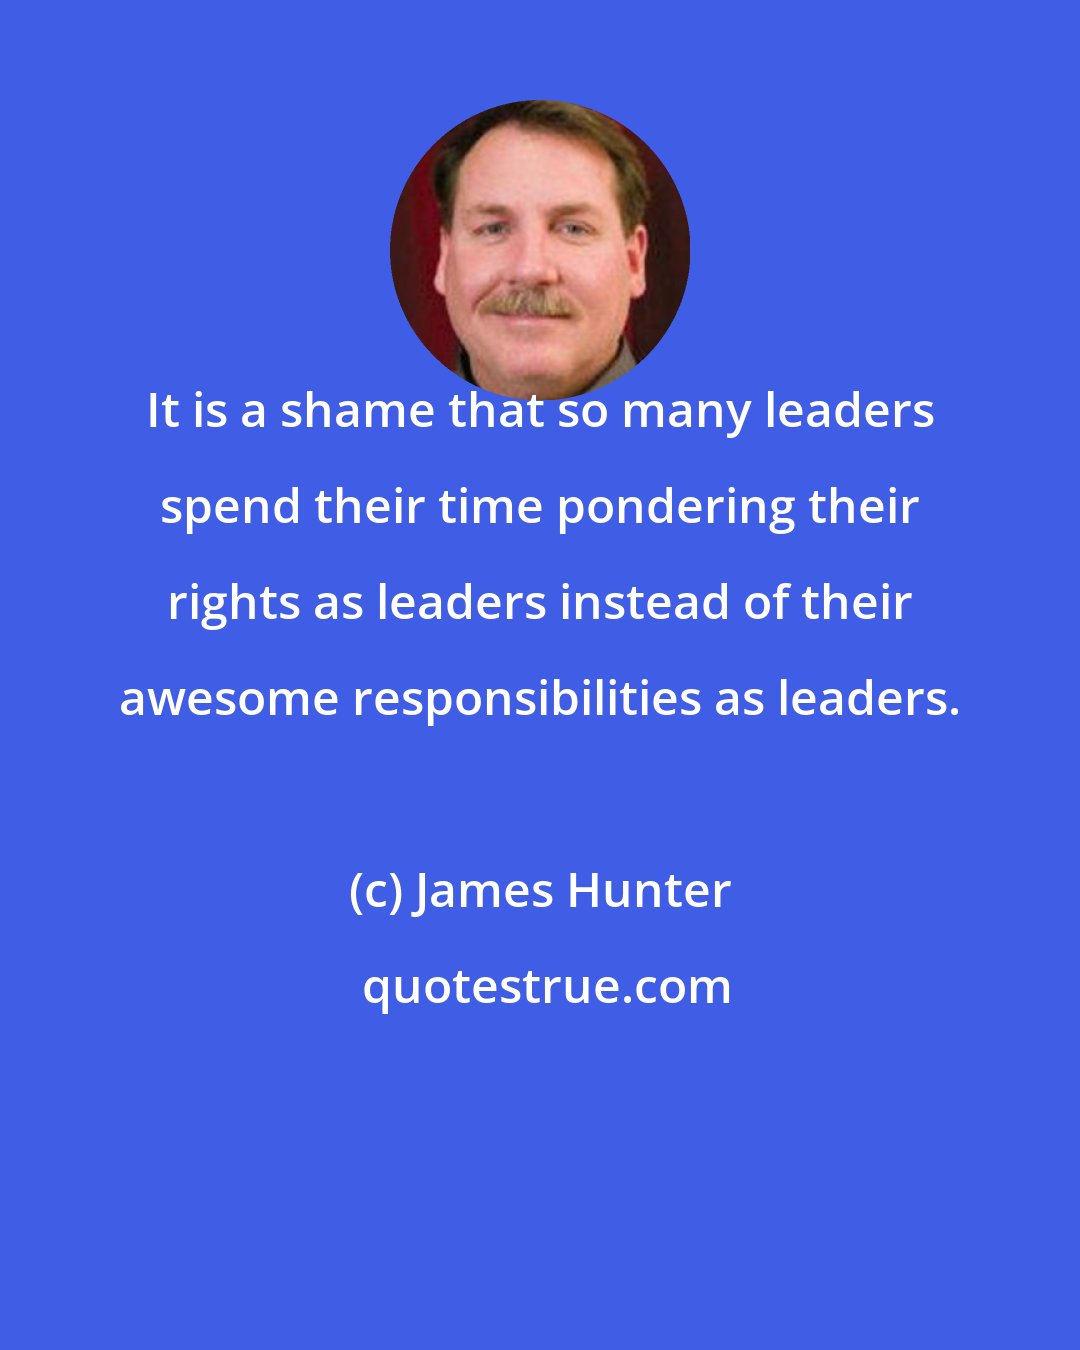 James Hunter: It is a shame that so many leaders spend their time pondering their rights as leaders instead of their awesome responsibilities as leaders.